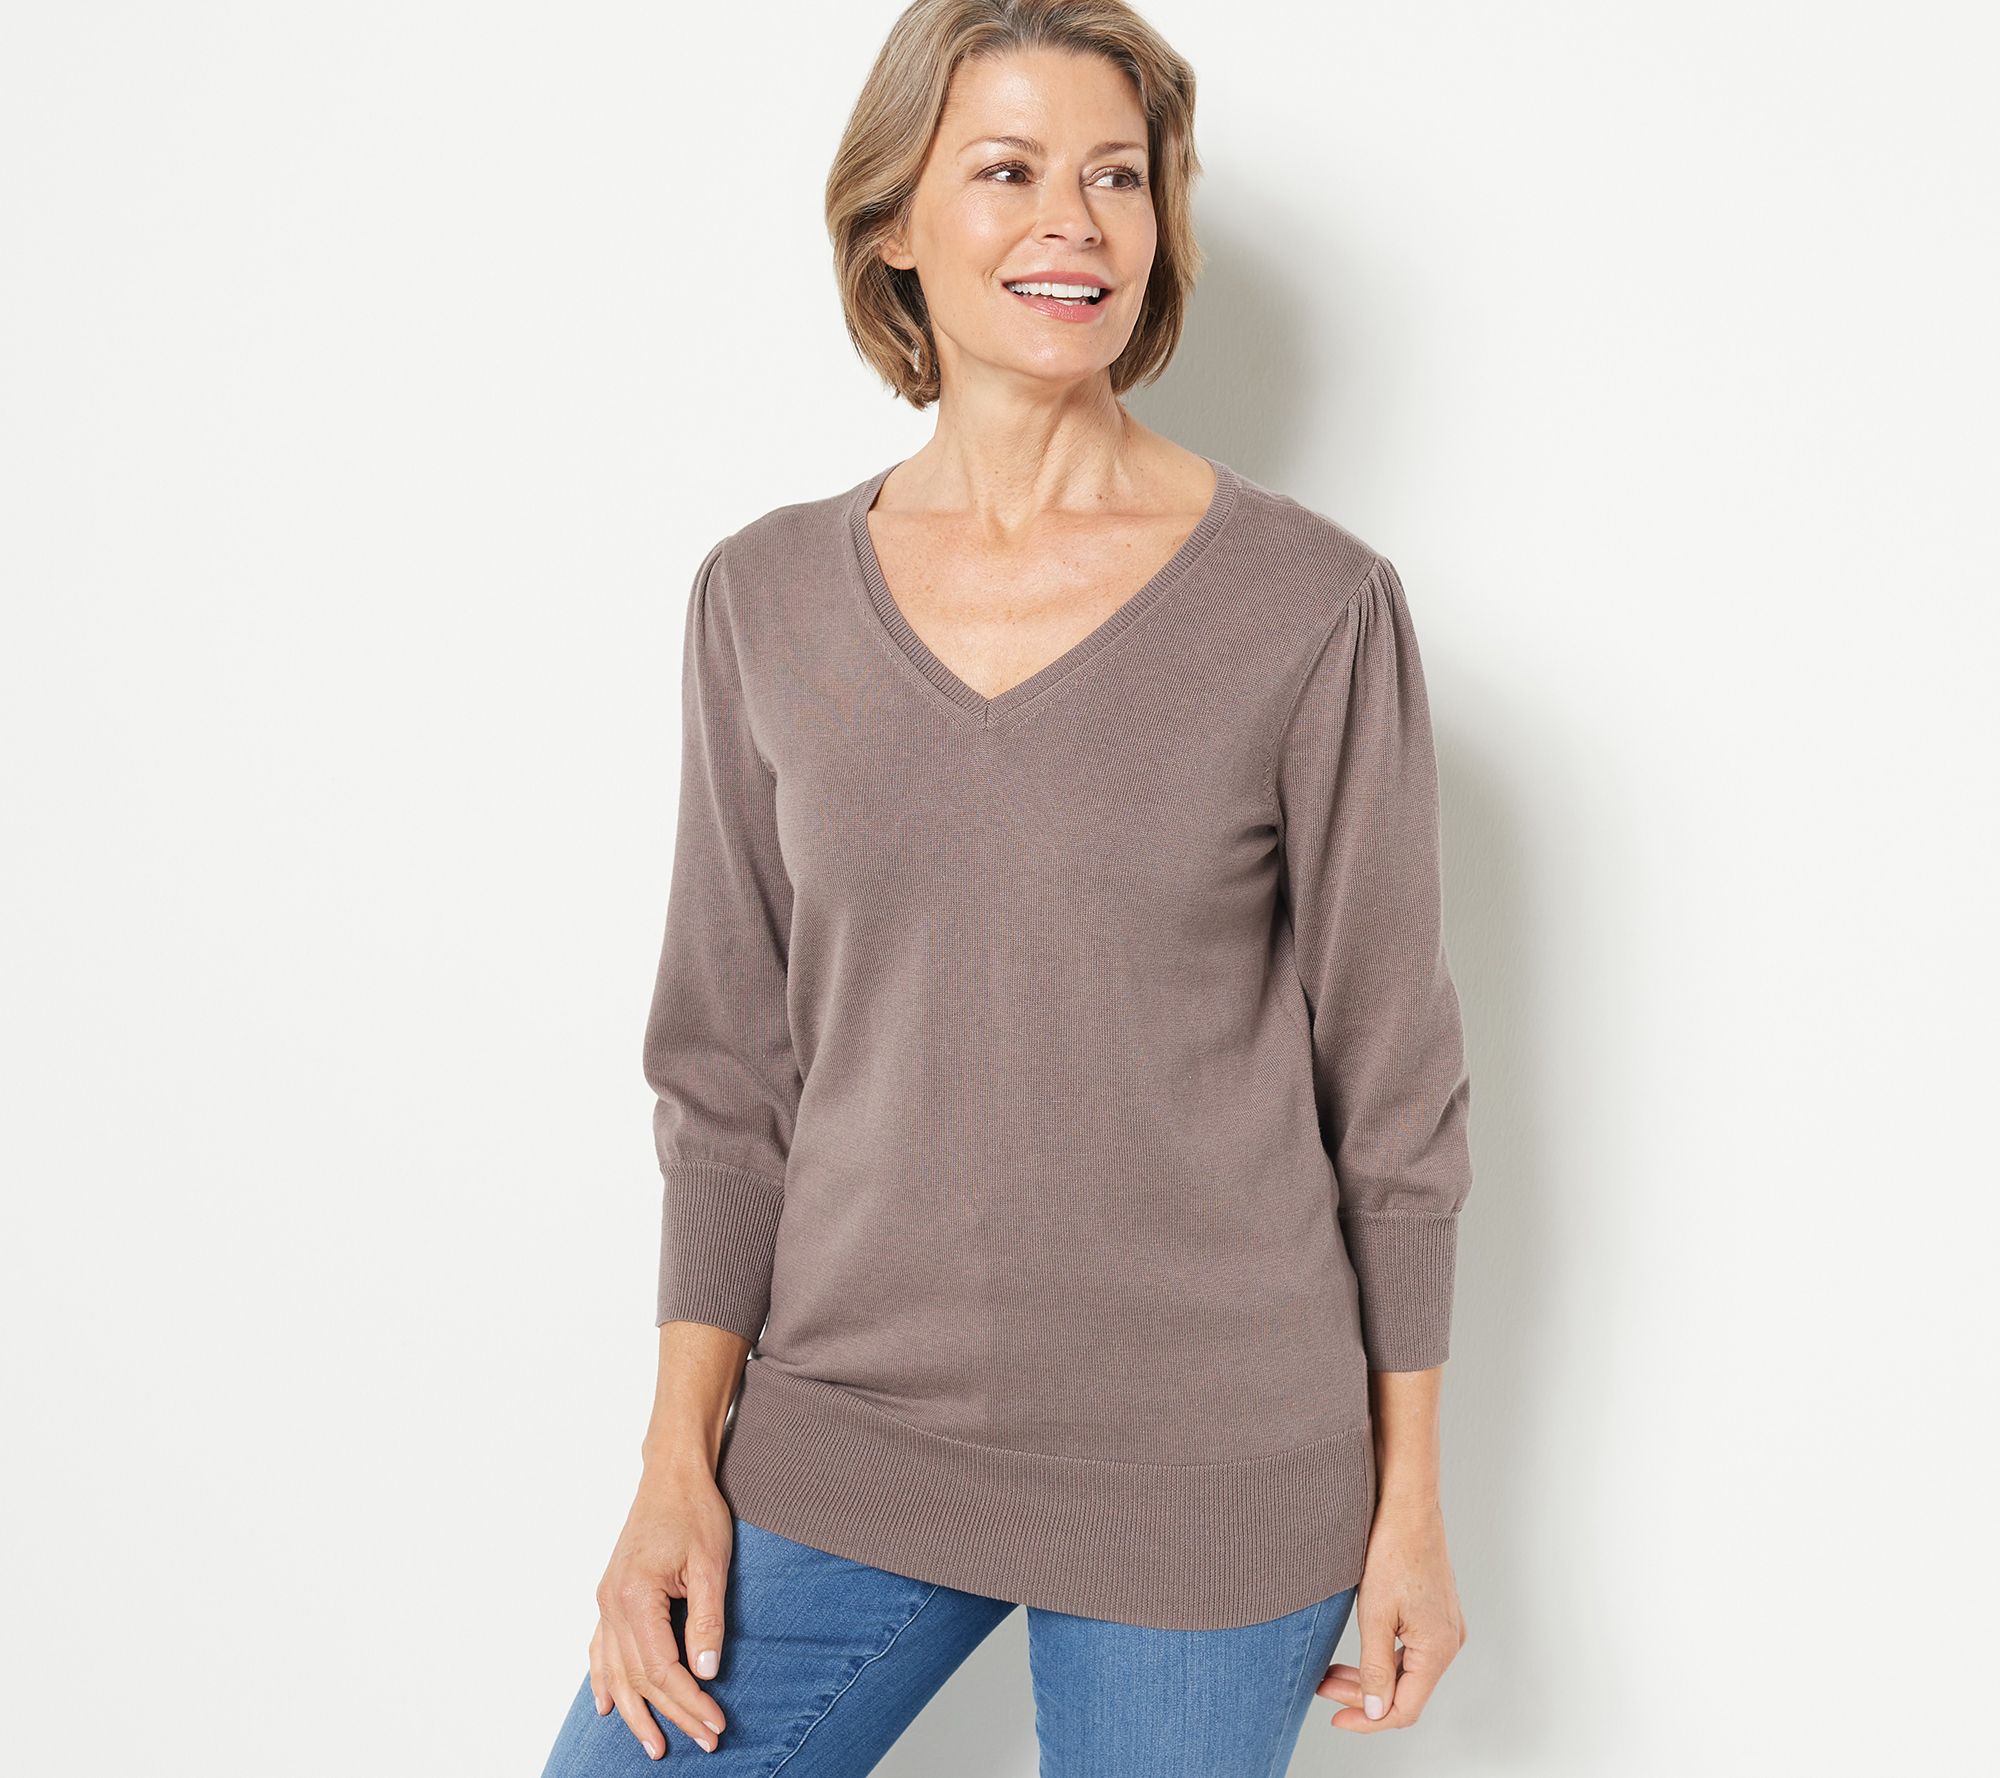 Cuddl Duds Women's Soft Knit Long-sleeve Crewneck Top In Misty